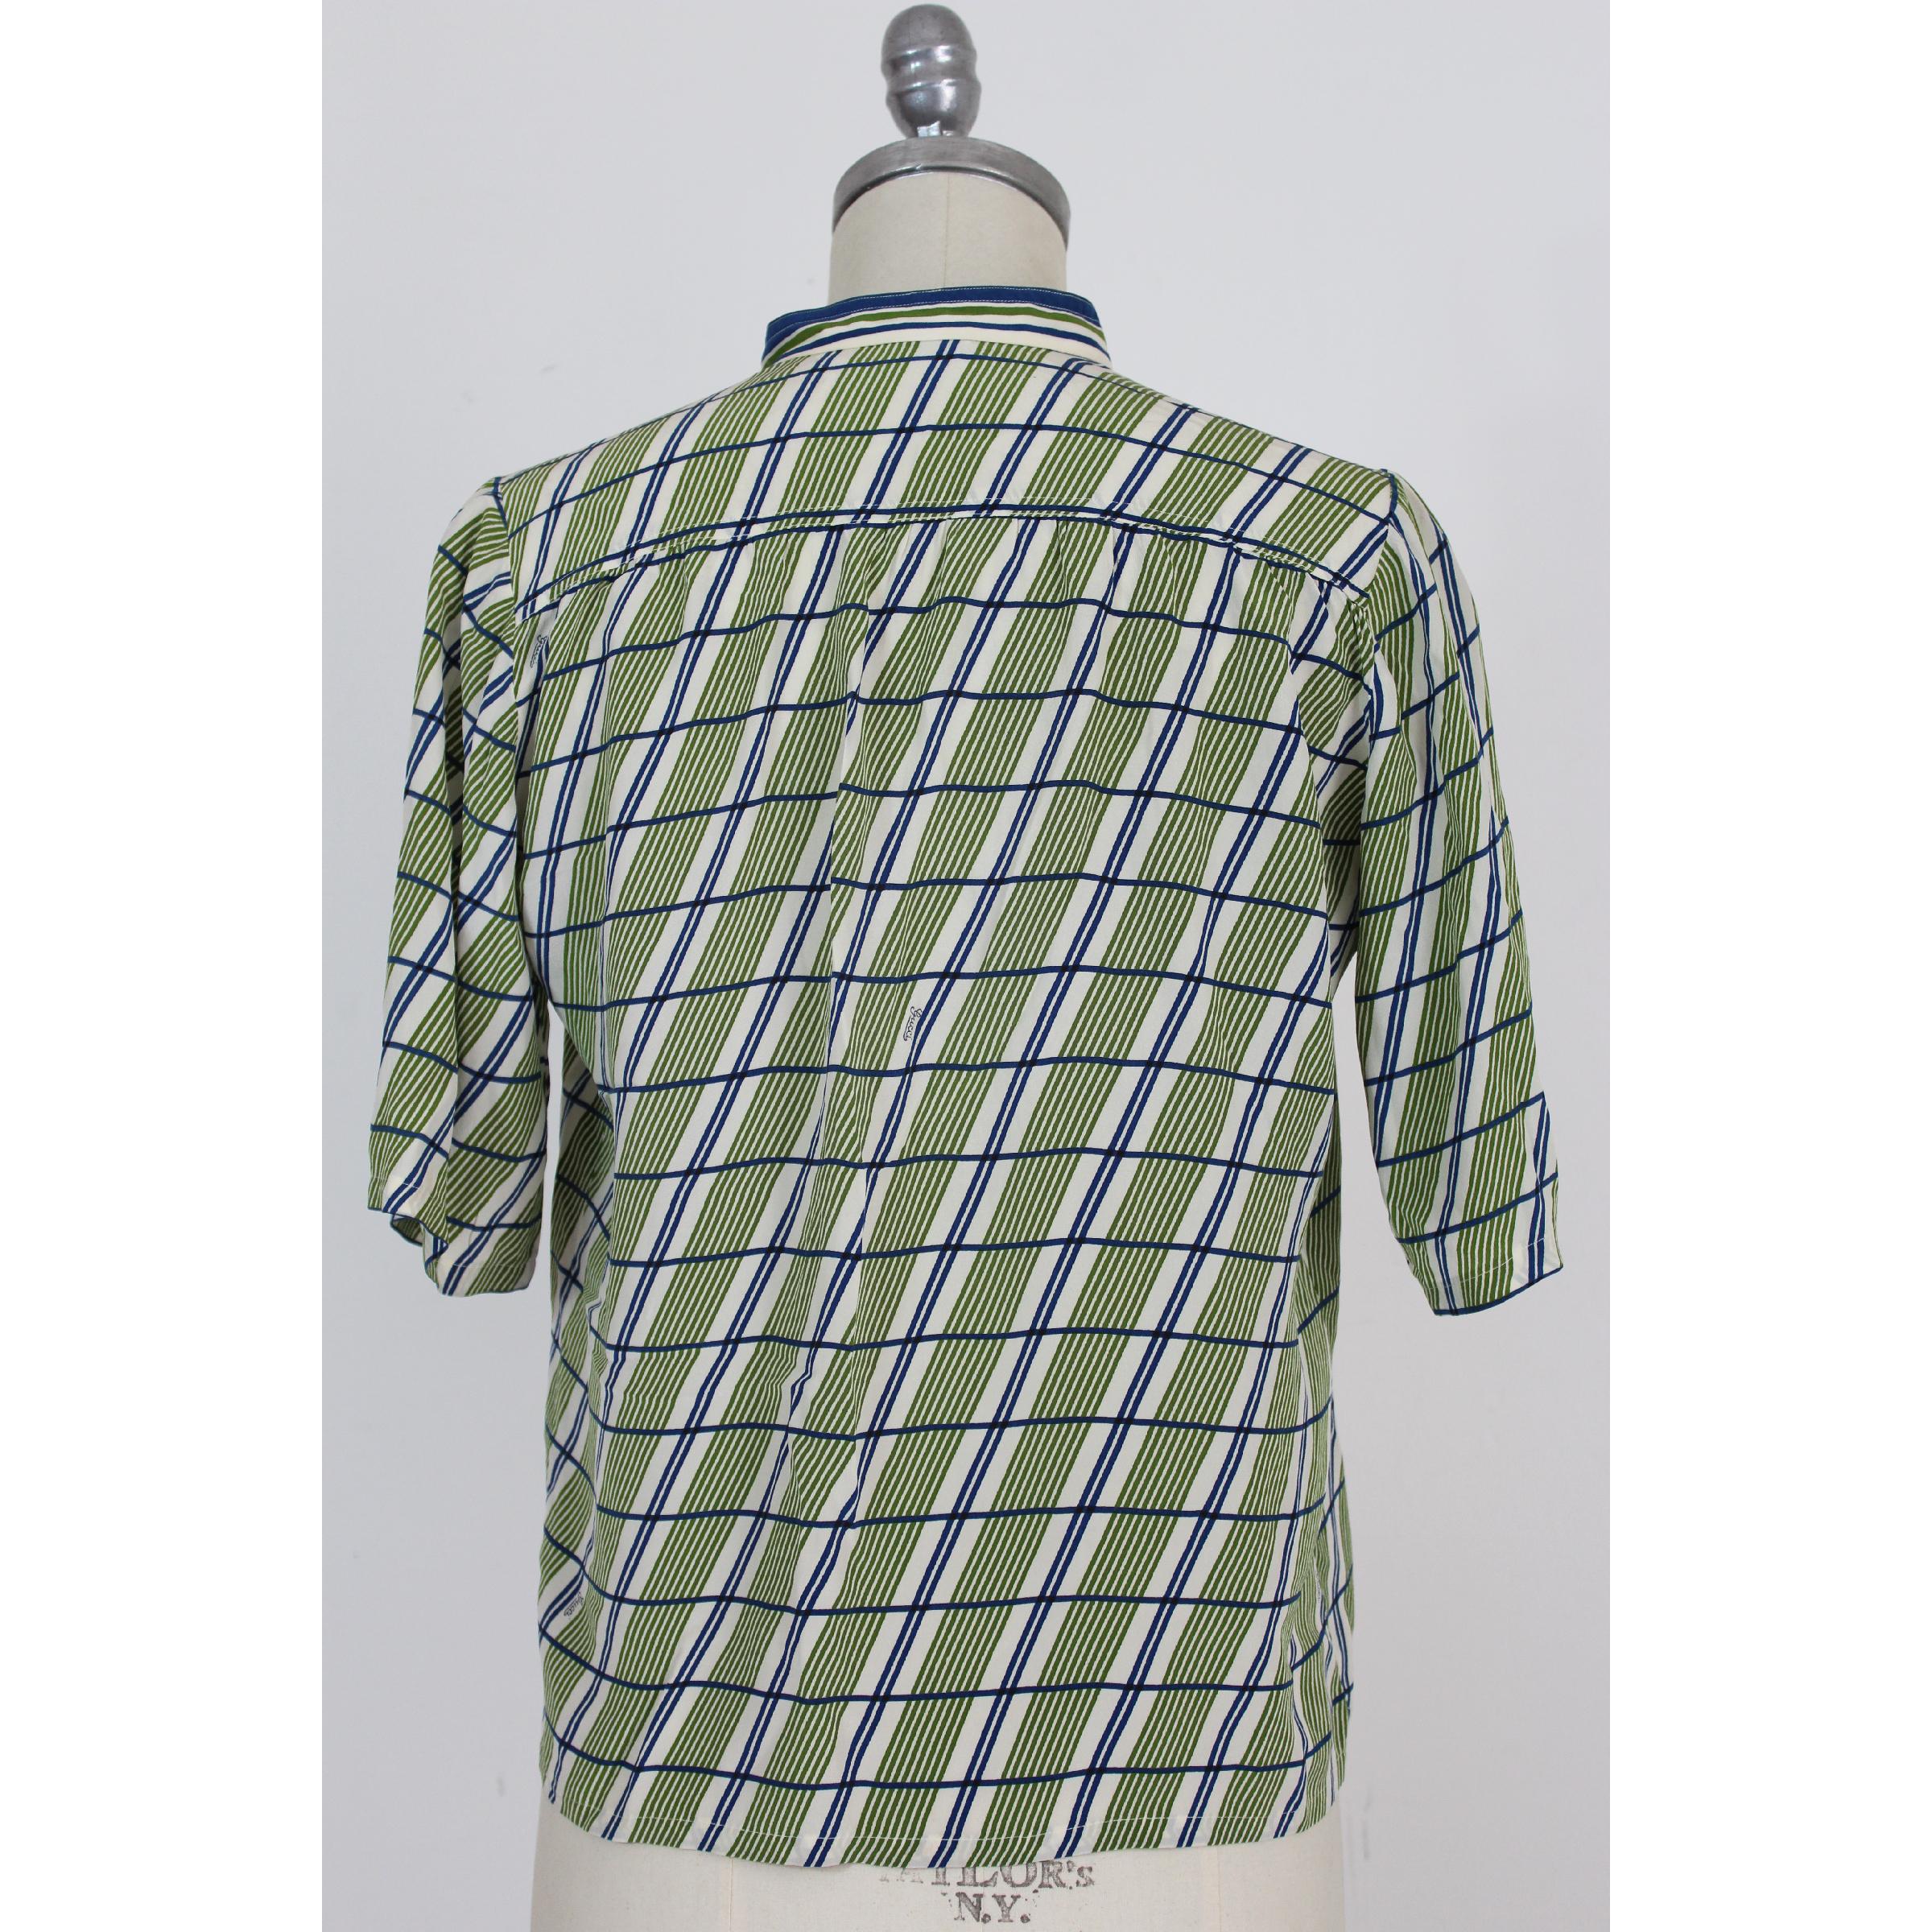 Gucci vintage women's sweater. Blue and green color with stripes. 100% silk. Polo model with collar and short sleeves. 80s. Made in Italy. Excellent vintage condition. Missing label but on the whole shirt there is the designer's signature. 

Size: